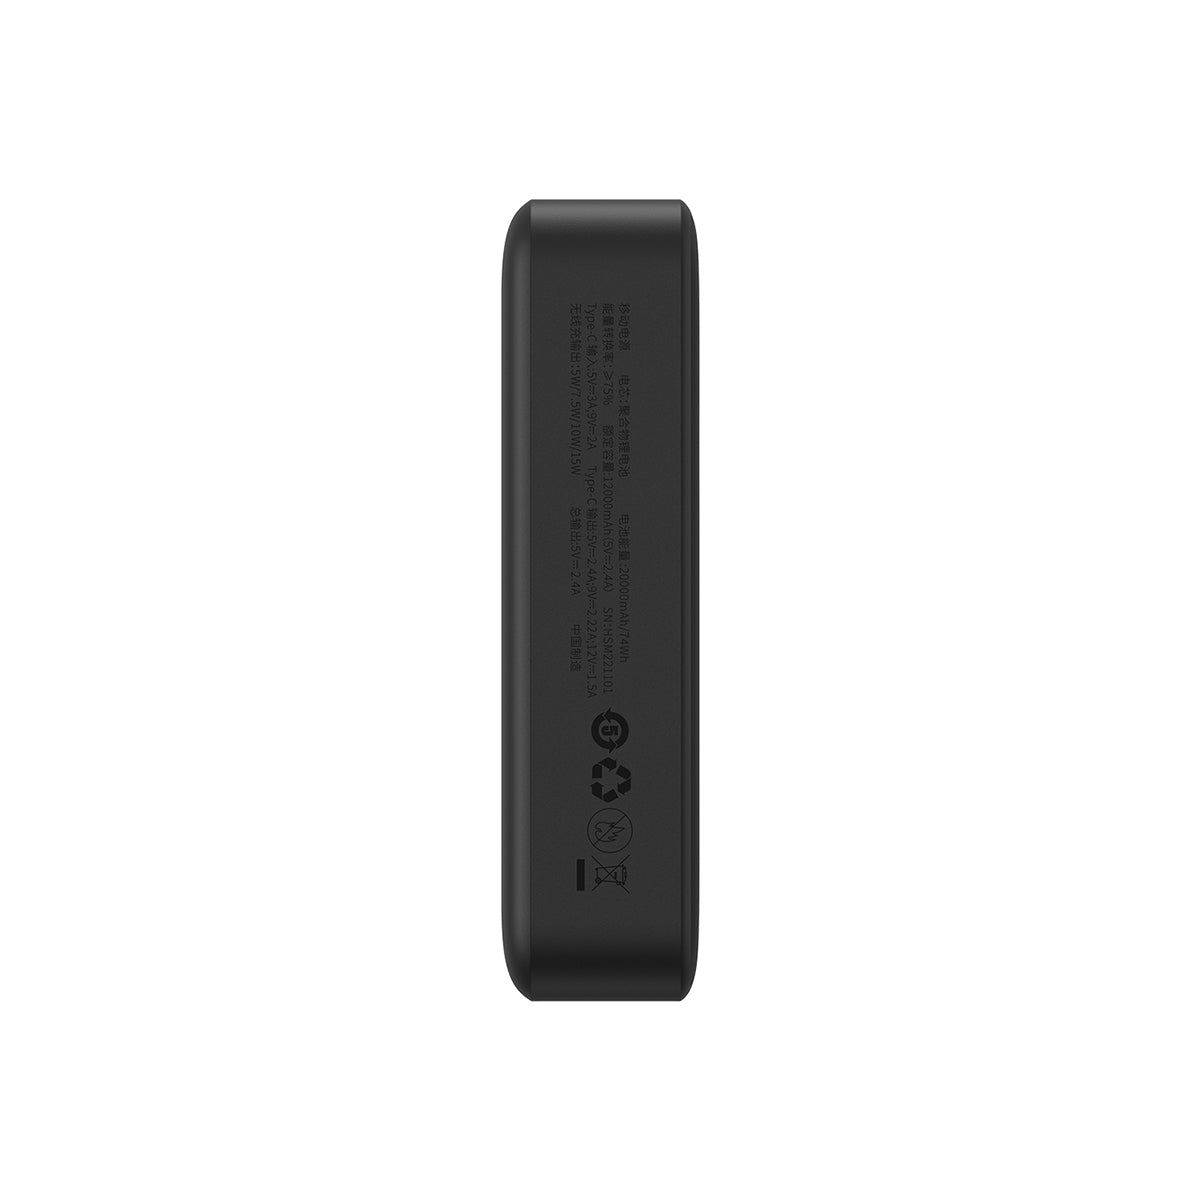 Powerbank Baseus Magnetic Mini 20000mAh 20W MagSafe (black) PPCX150001 buy  in the online store at Best Price